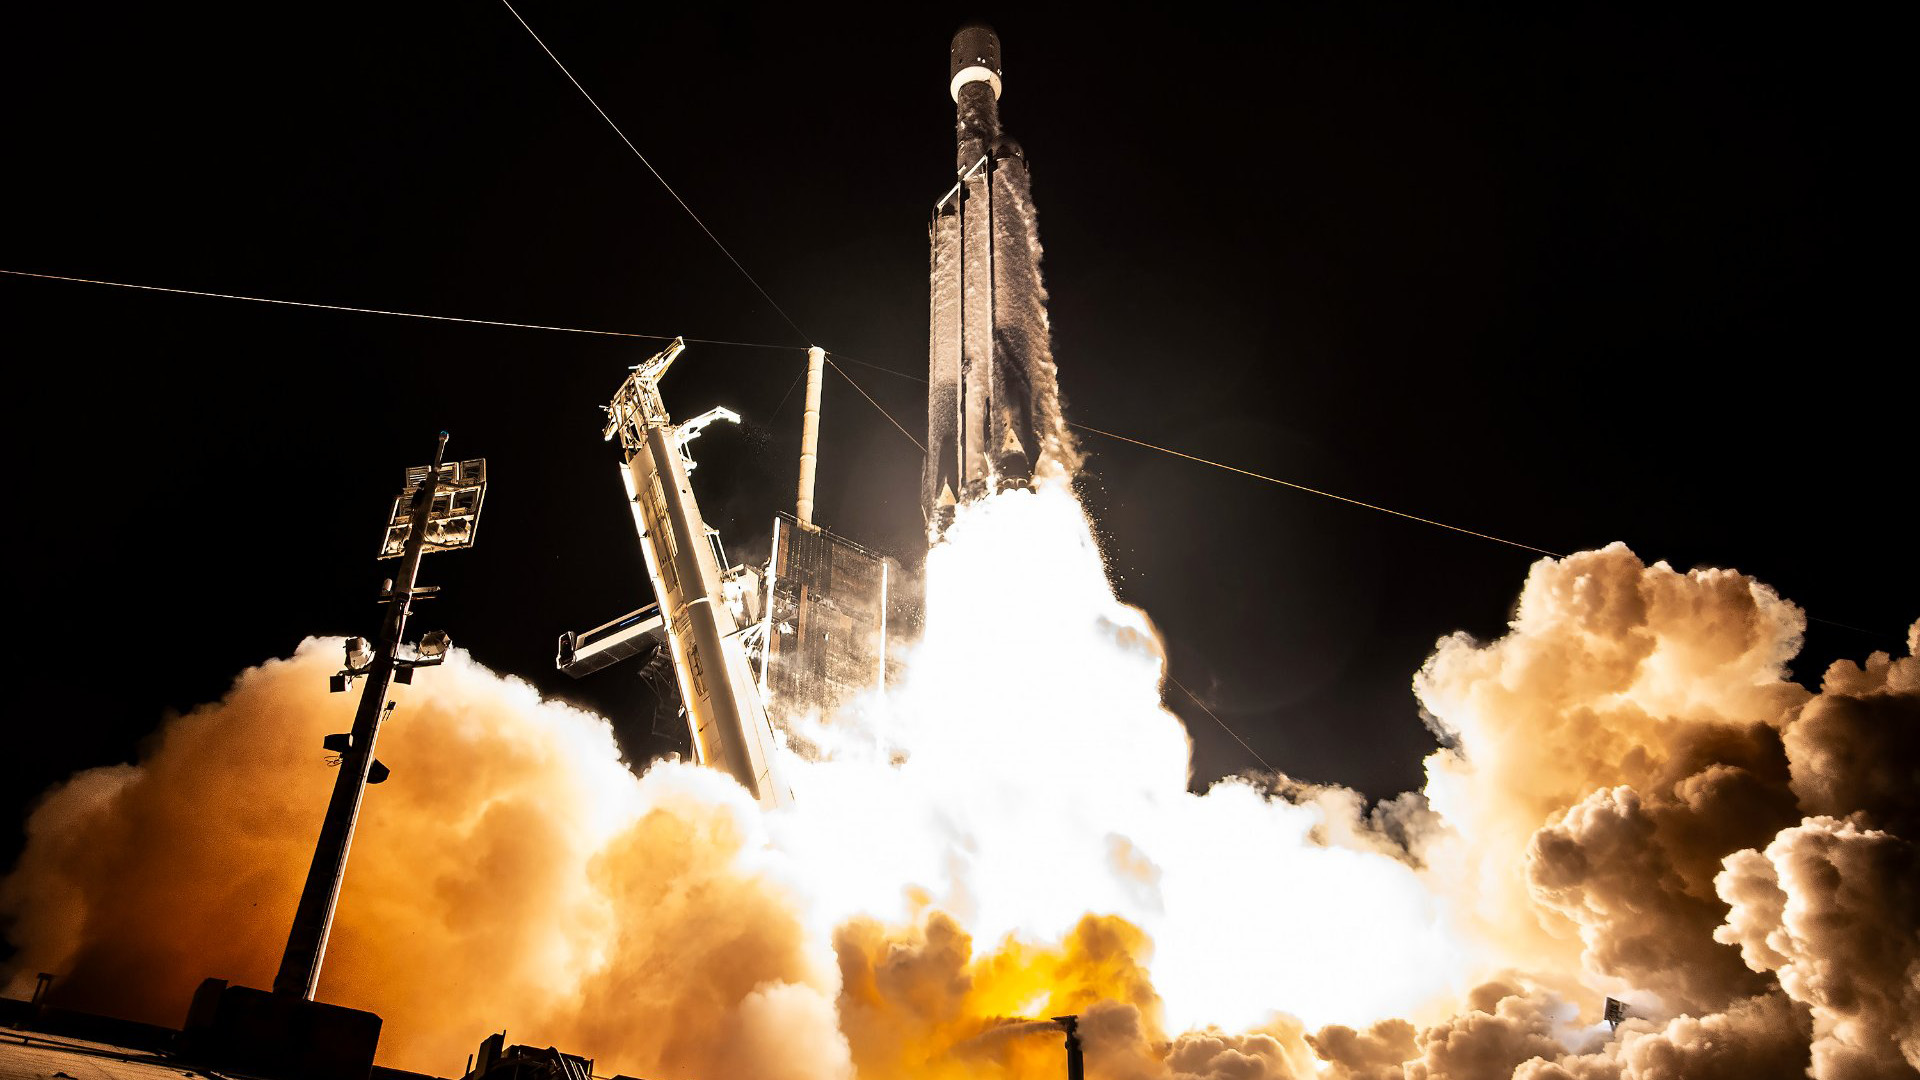 Follow the launch of a powerful SpaceX rocket to “explore a world of metal”